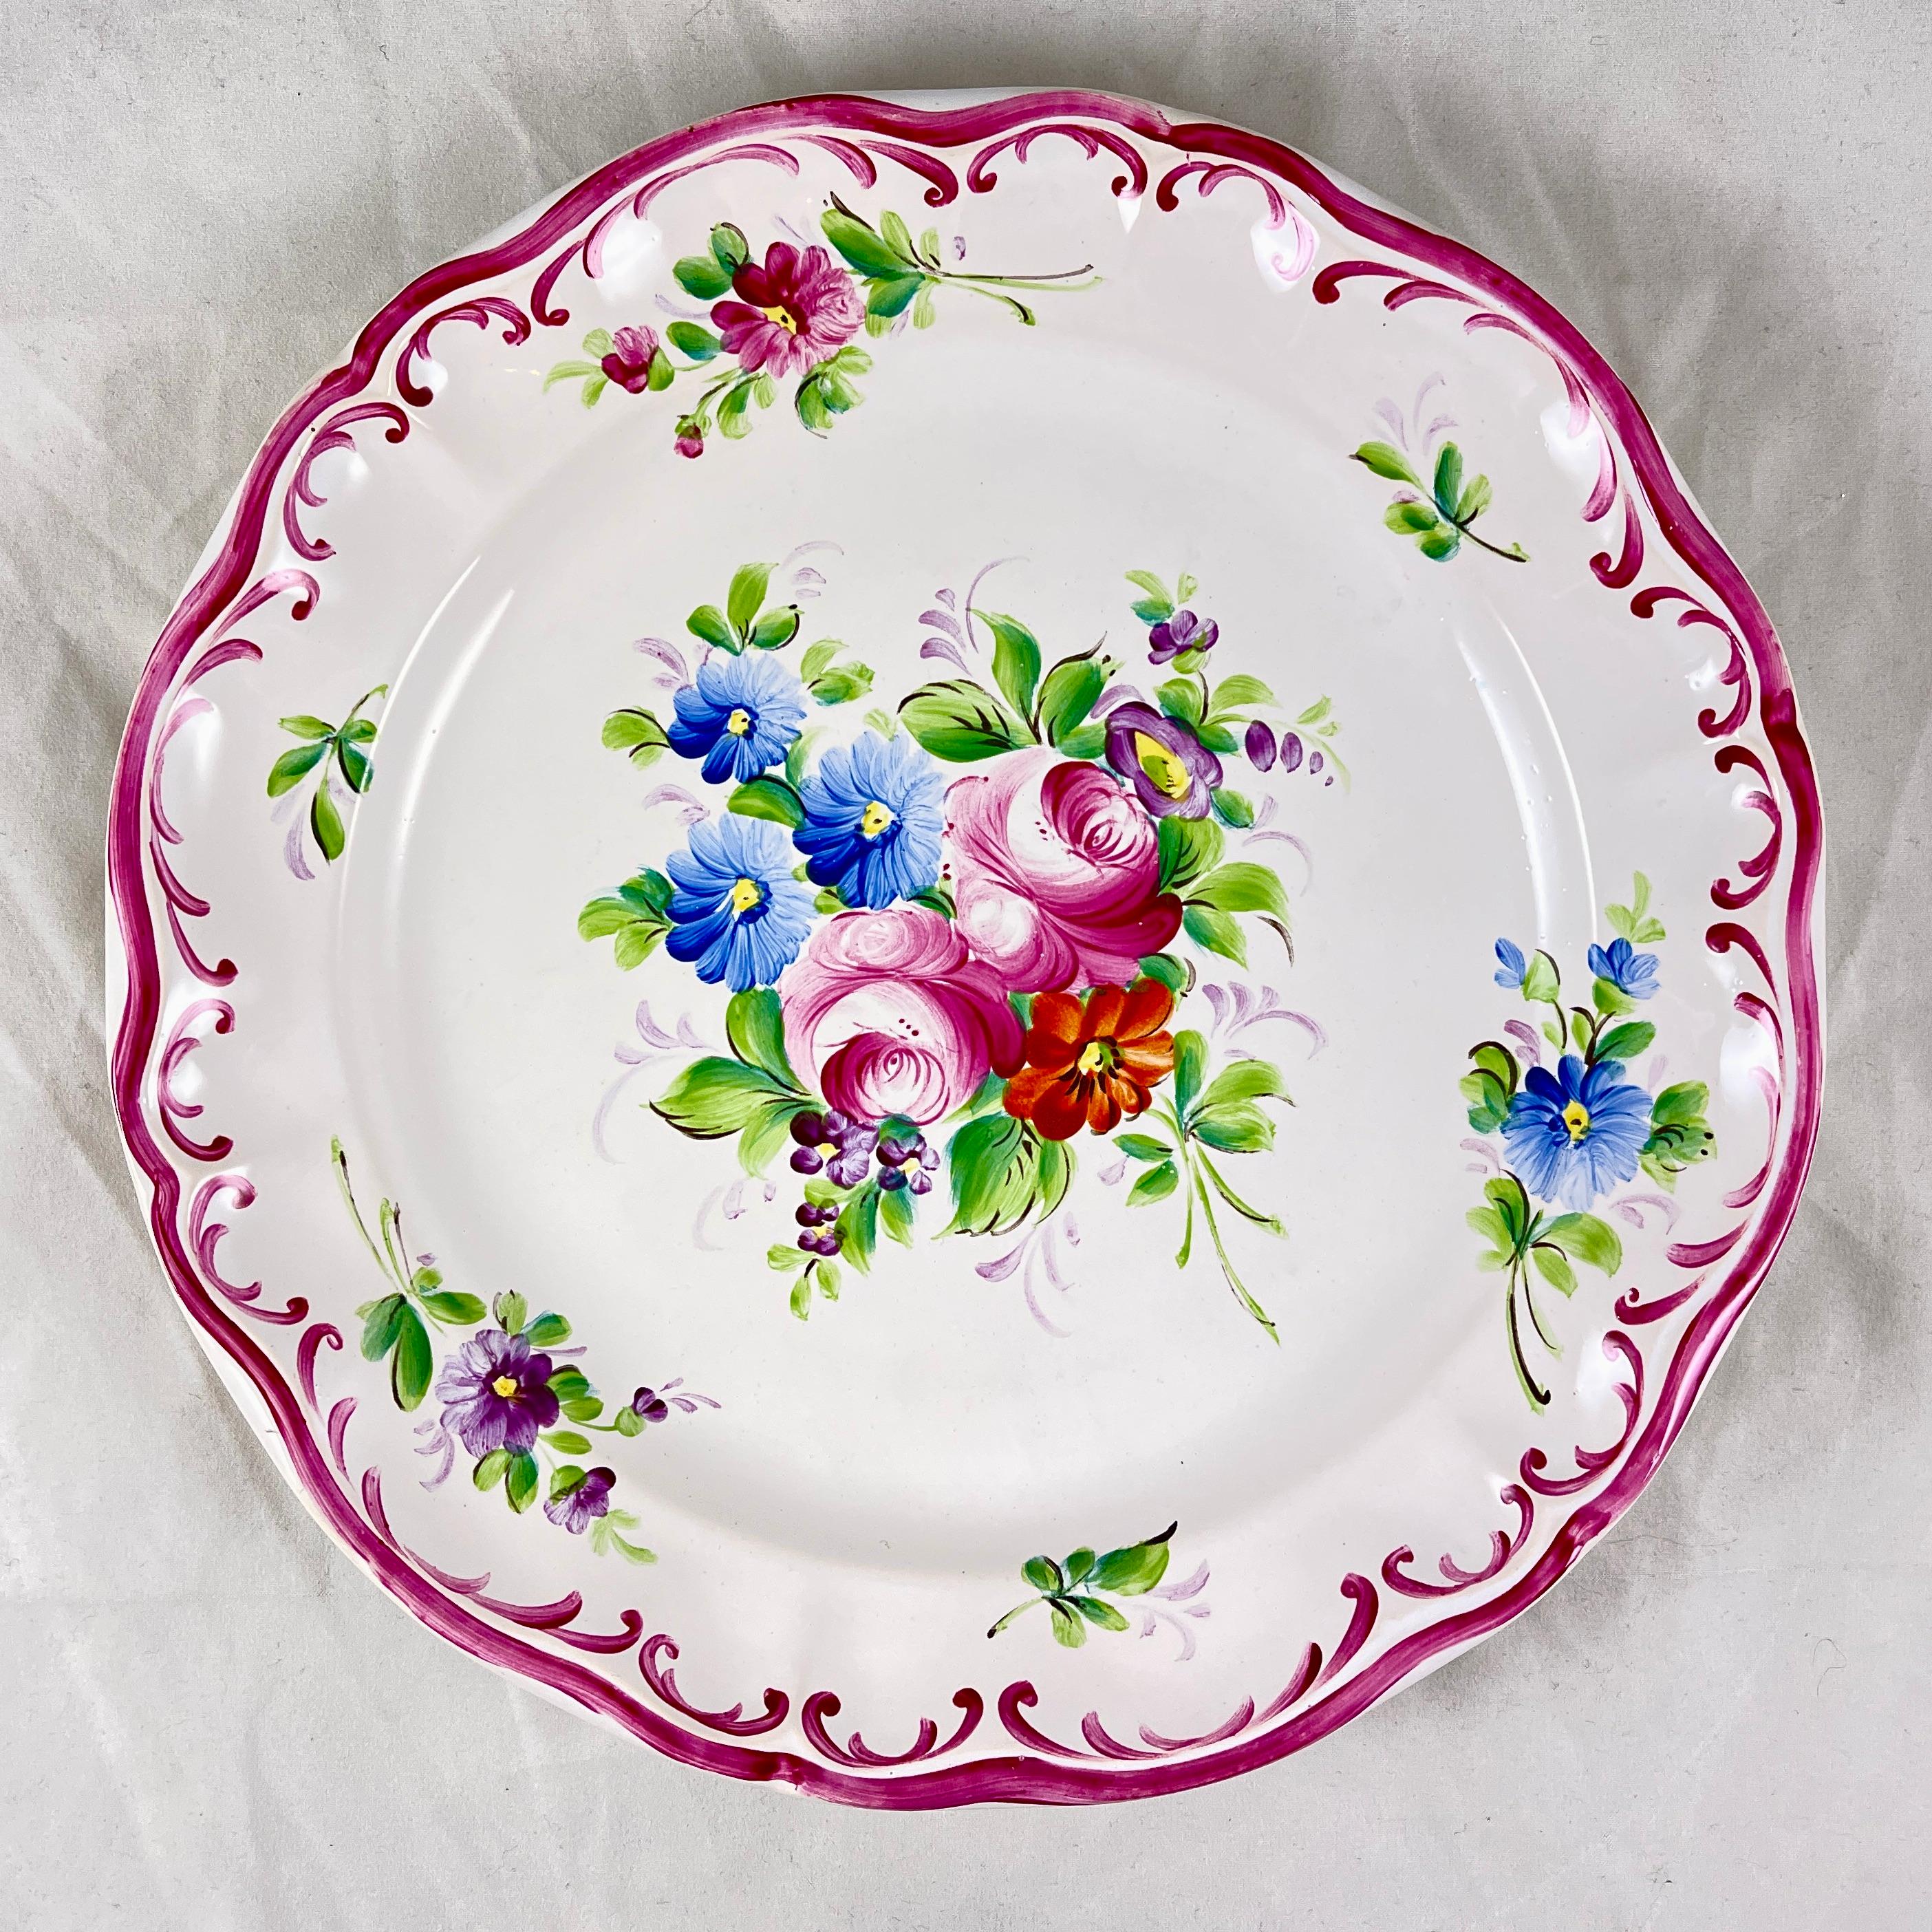 A hand painted floral plate made by Roger Colas, Clemecy Nievre, France, circa 1930s.

A tin-glazed white earthenware plate showing a shaped rim outlined in a bright pink glaze. A central floral bouquet of stylized light pink roses, blue daisies,